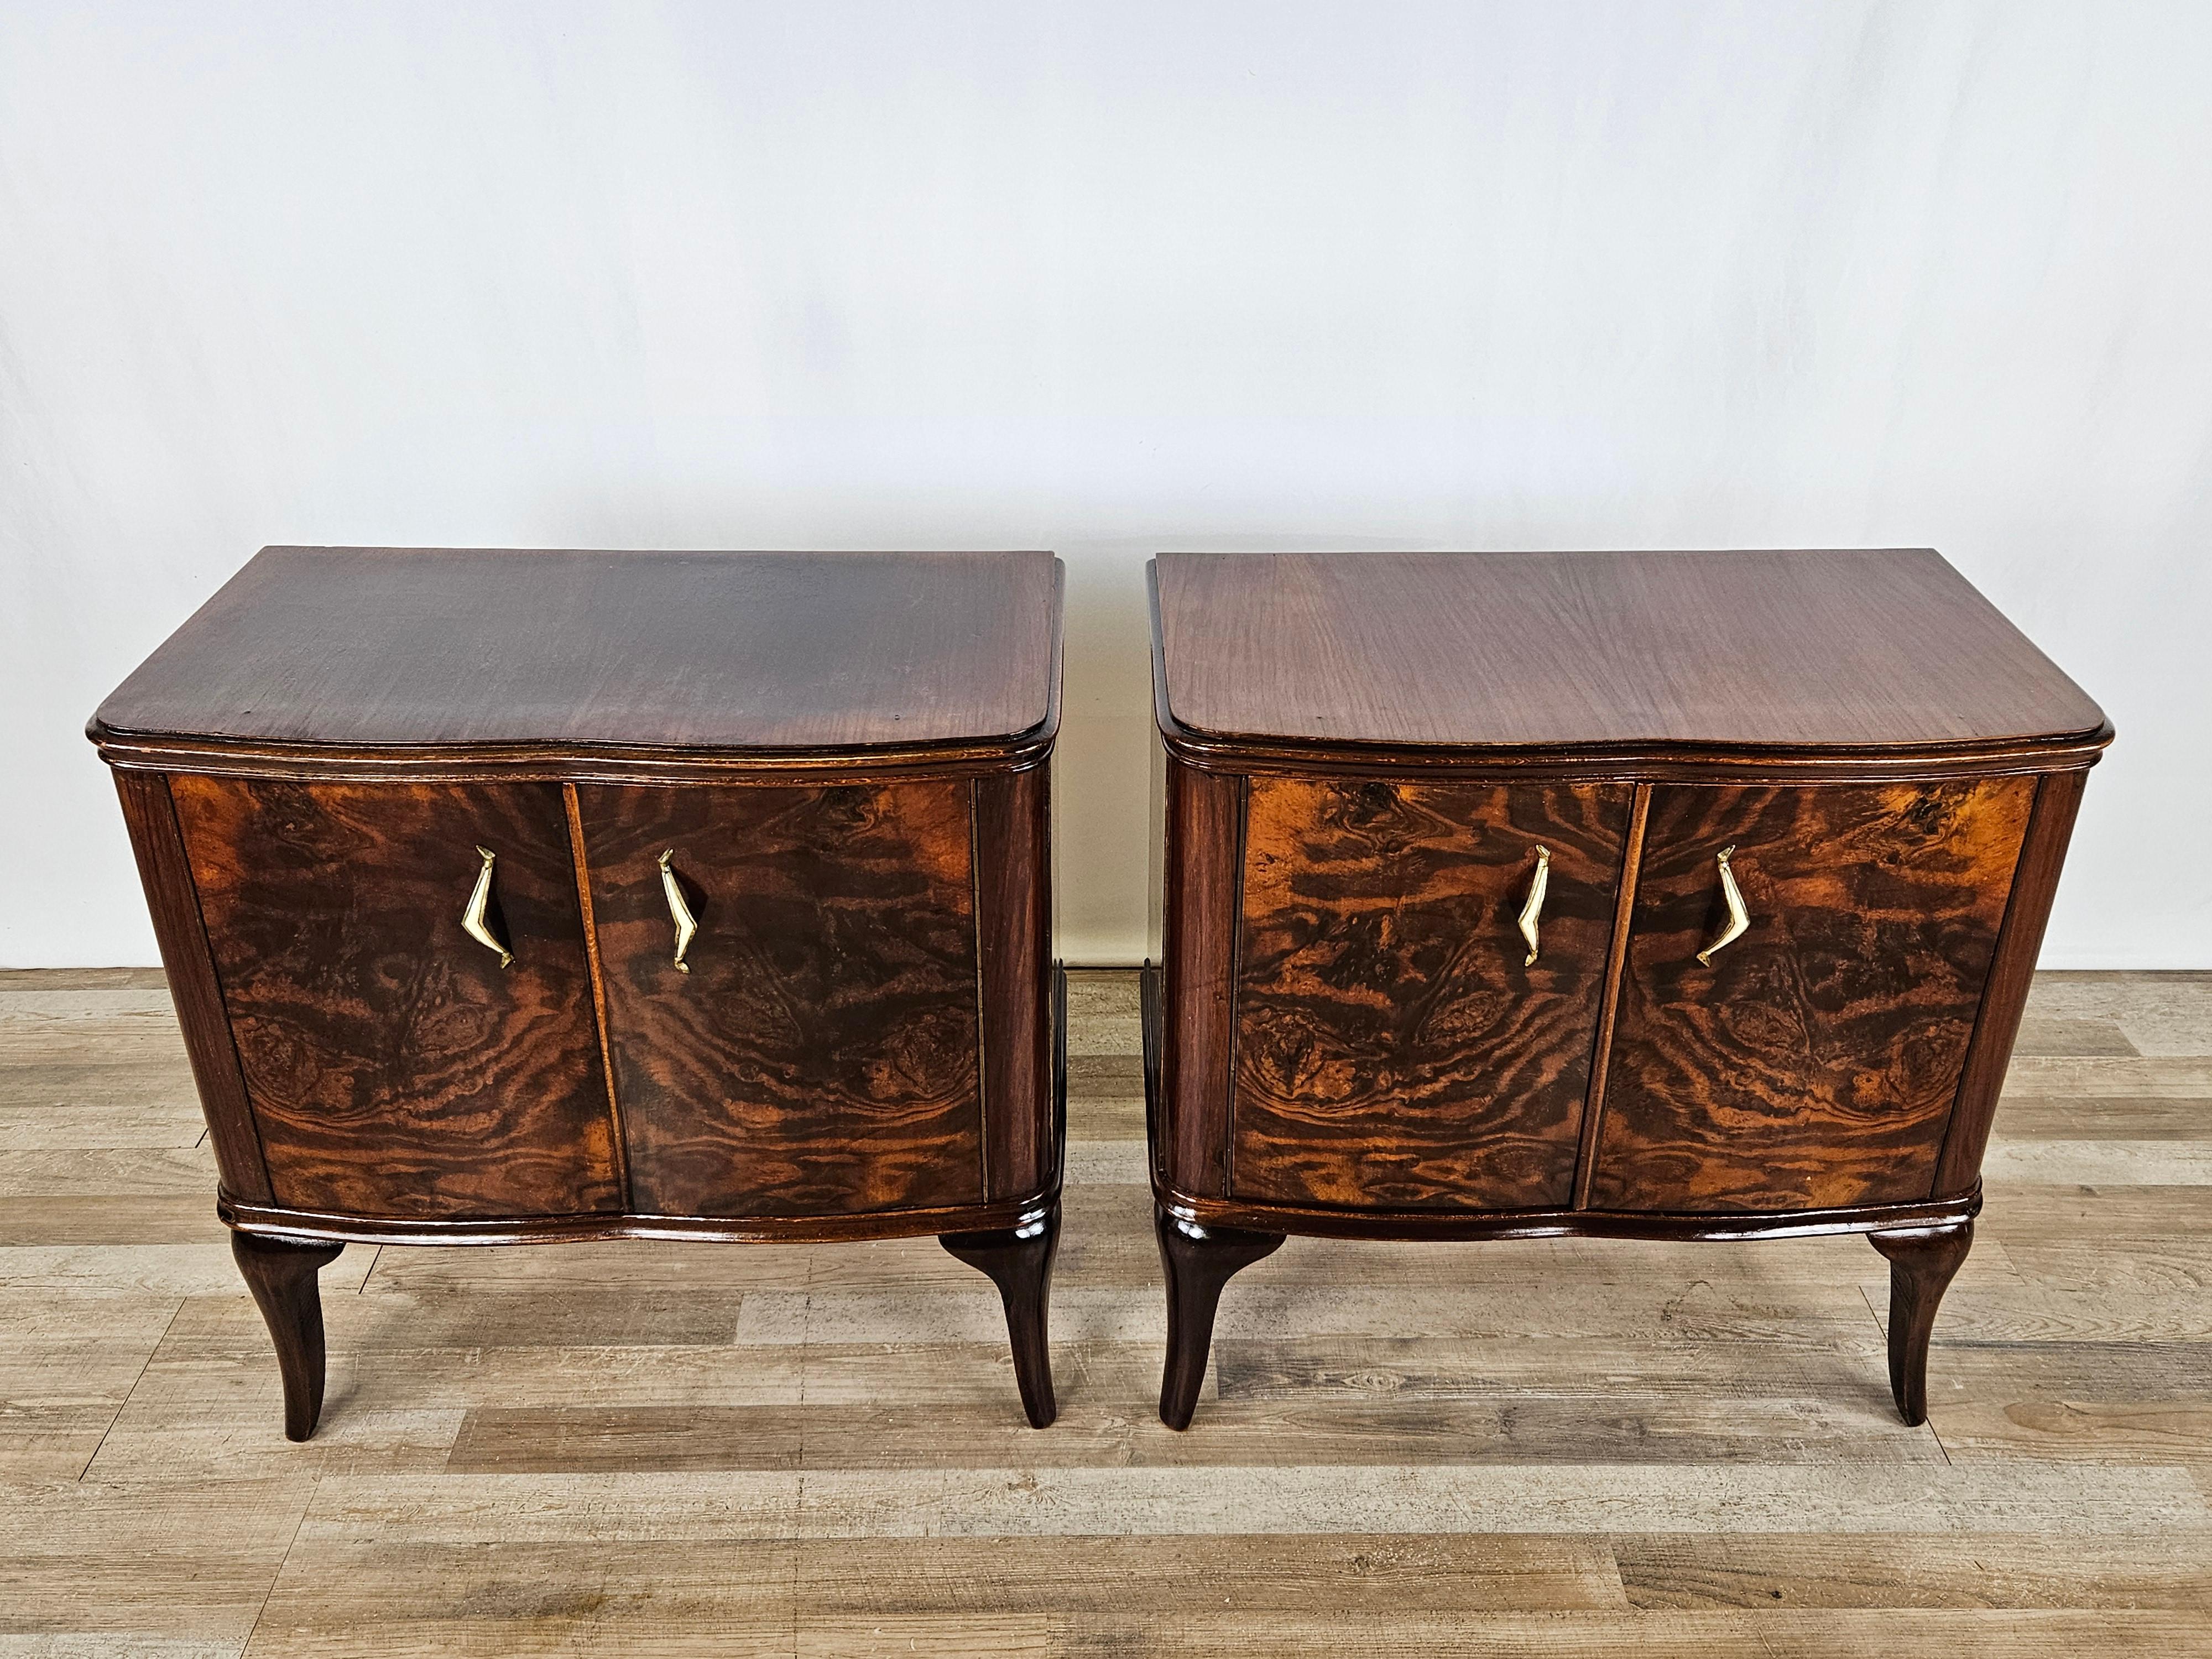 1950s modern antique nightstands with Art Deco inspiration, Italian production of high quality and workmanship.

Note the distinctive wavy, machined legs and brass handles. Ample space inside the doors.

The nightstands have been oil and shellac